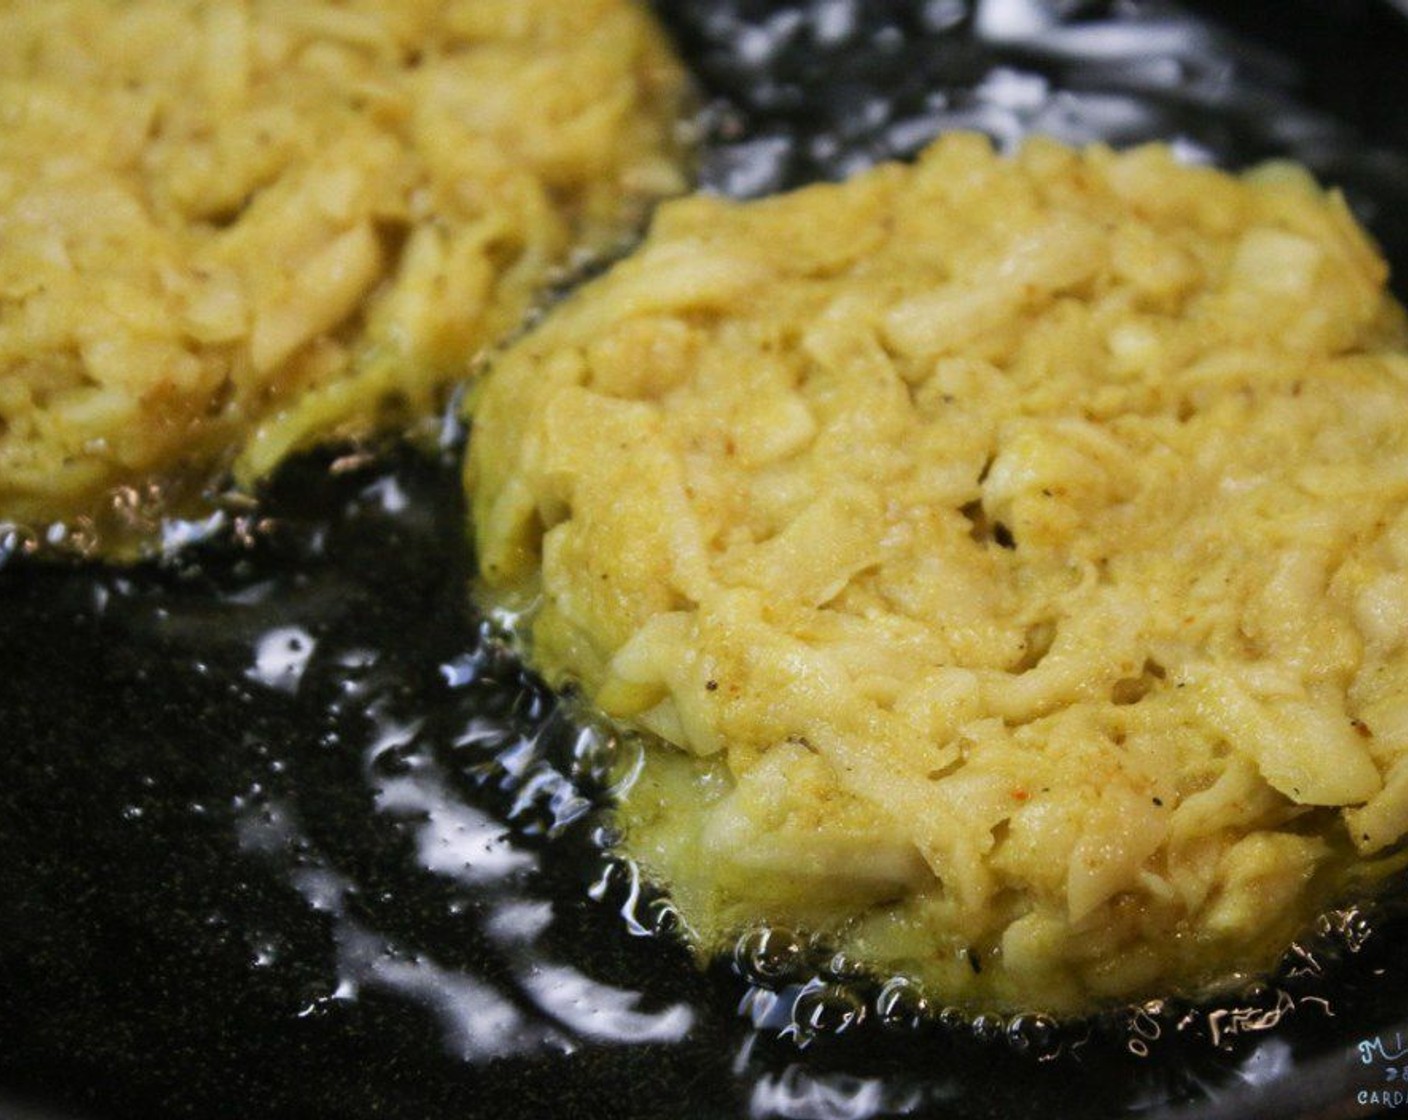 step 8 Place the ball into the hot oil and press down with a spatula until it is 1/2 inch thick. Place more latkes into the pan if you have room in your skillet. Cook for 3 minutes or until golden brown. Carefully flip the latkes and cook for an additional 3 minutes or until golden brown. Place the cooked latke on a paper towel to get rid of excess oil.